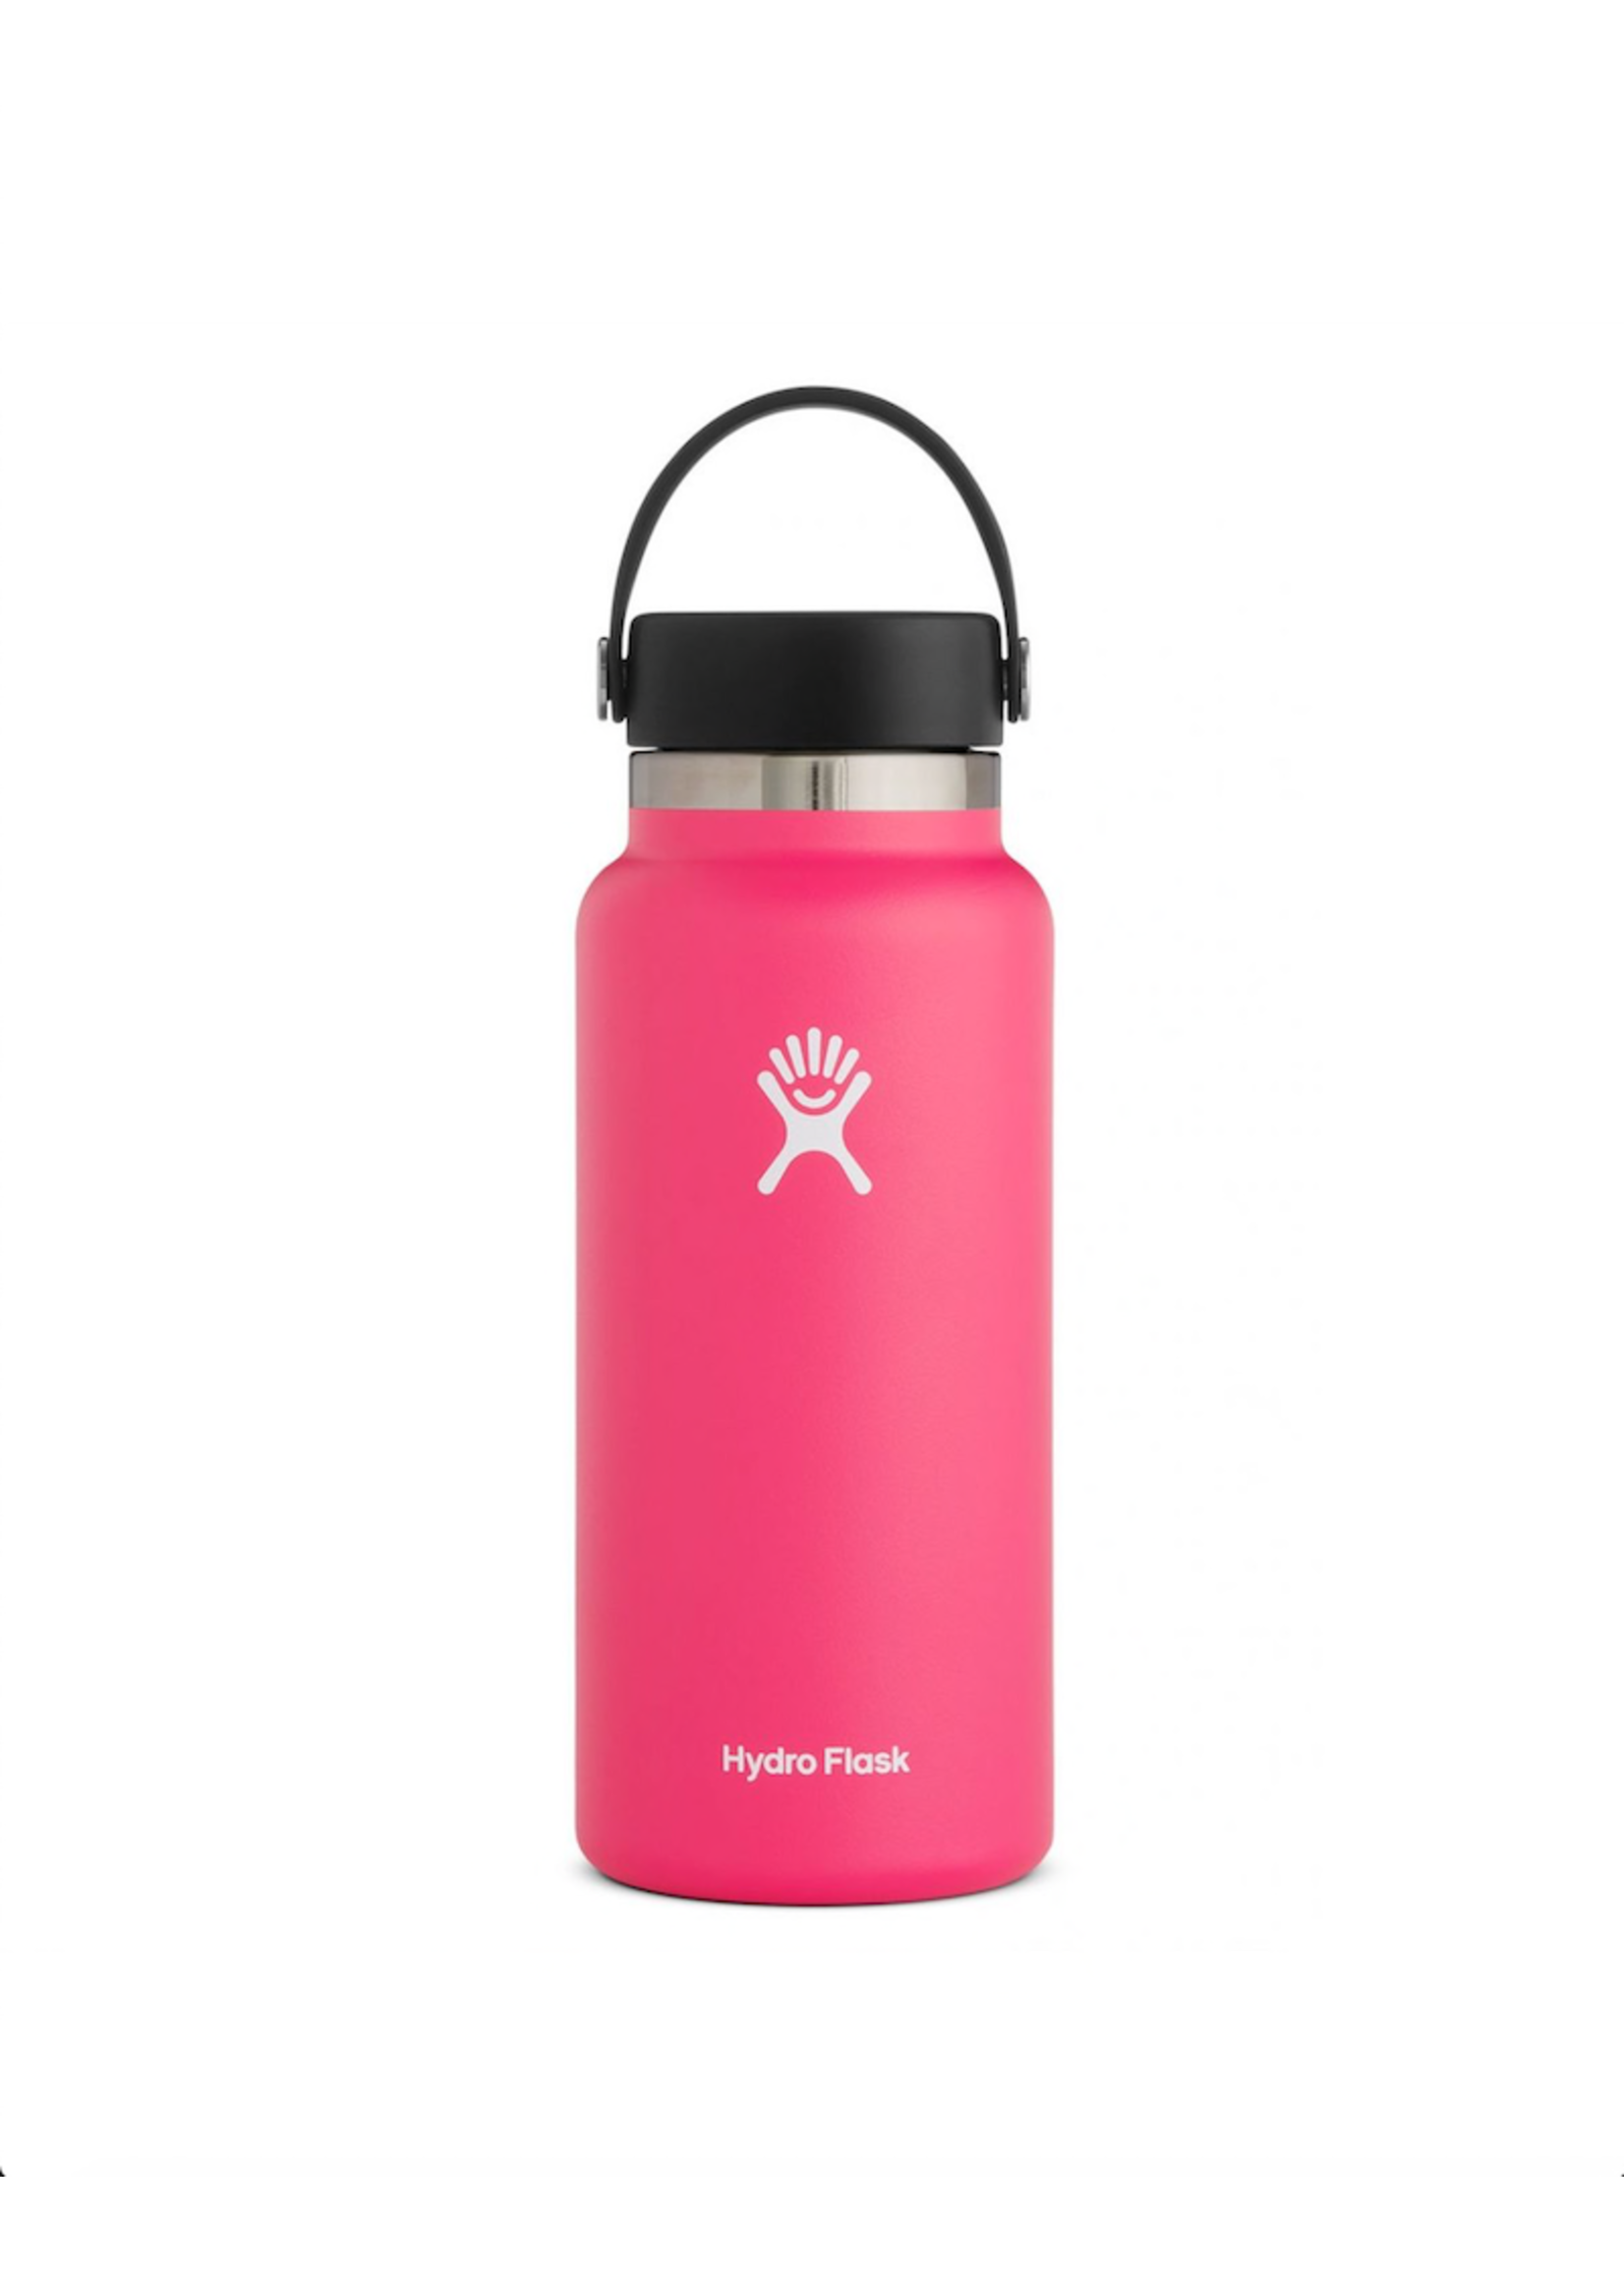 Hydro Flask Hydro Flask, 32 oz Wide Mouth 2.0  Flex Cap Insulated Stainless Steel Bottle in Watermelon